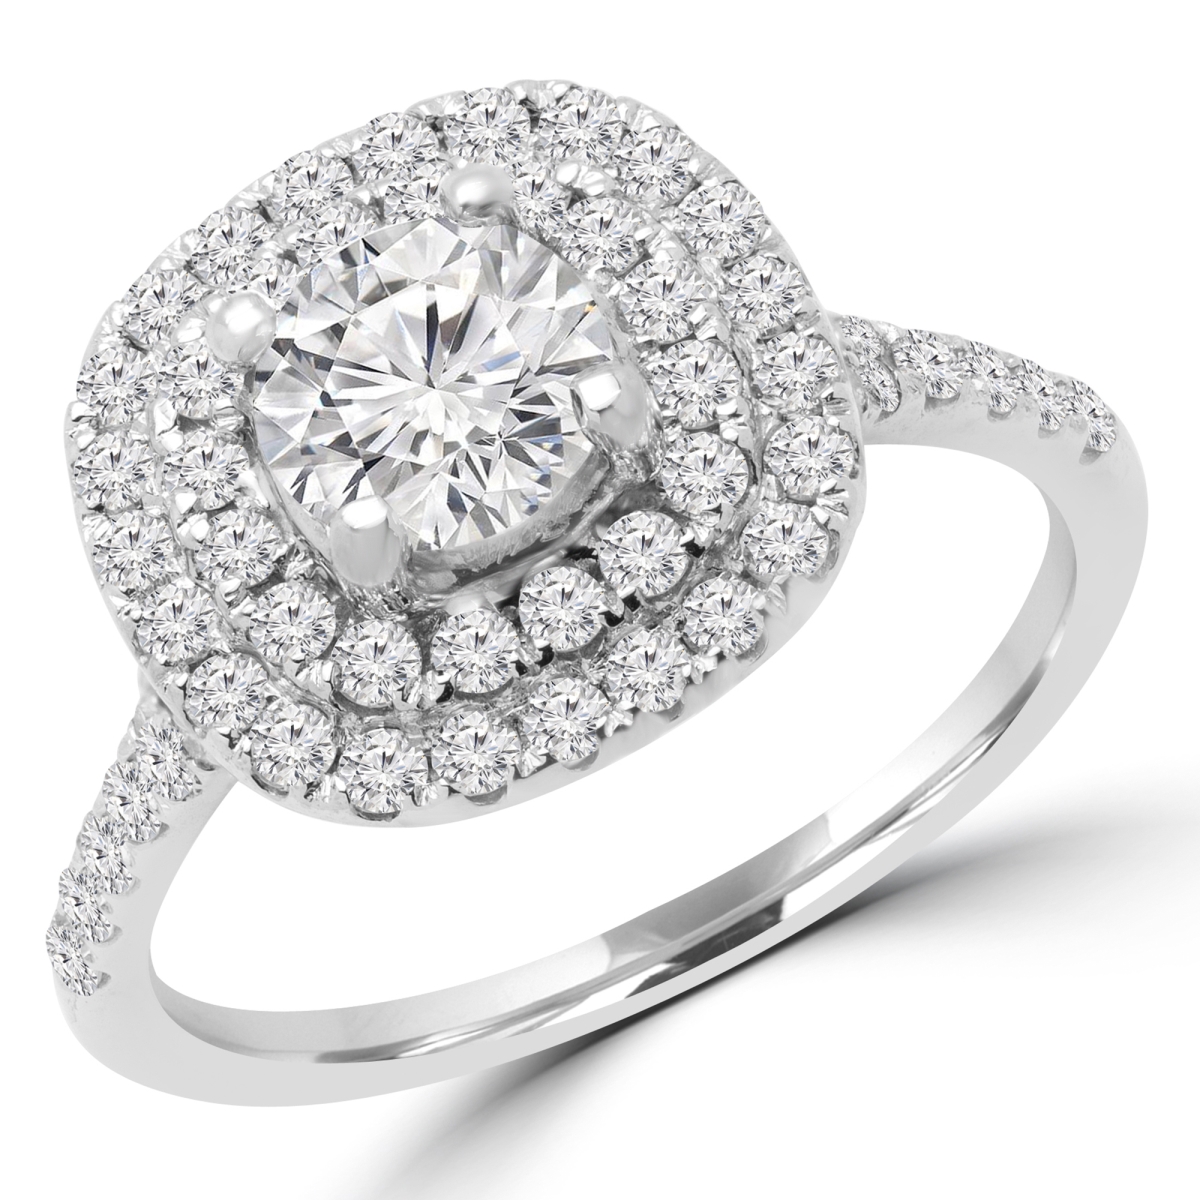 Picture of Majesty Diamonds MD170293-8.25 1.4 CTW Round Diamond Double Halo Engagement Ring in 14K White Gold - Size 8.25